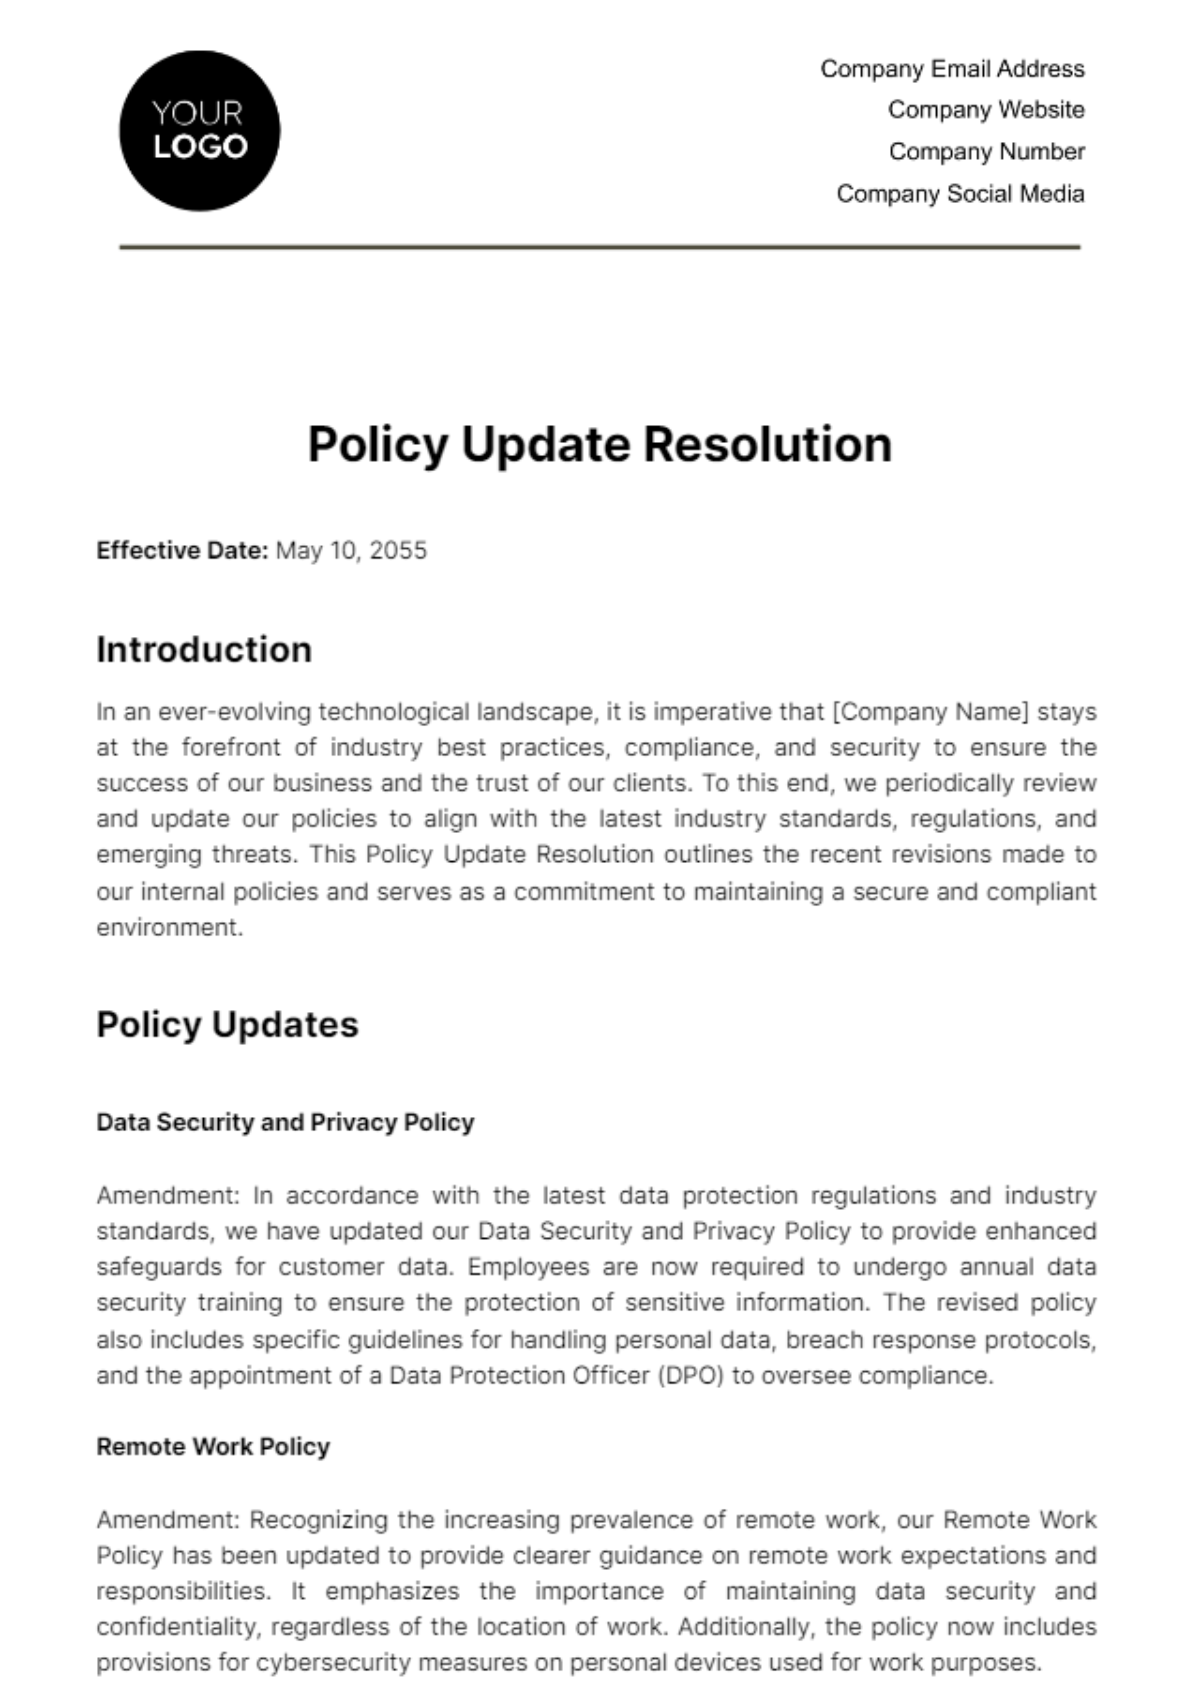 Free Policy Update Resolution HR Template